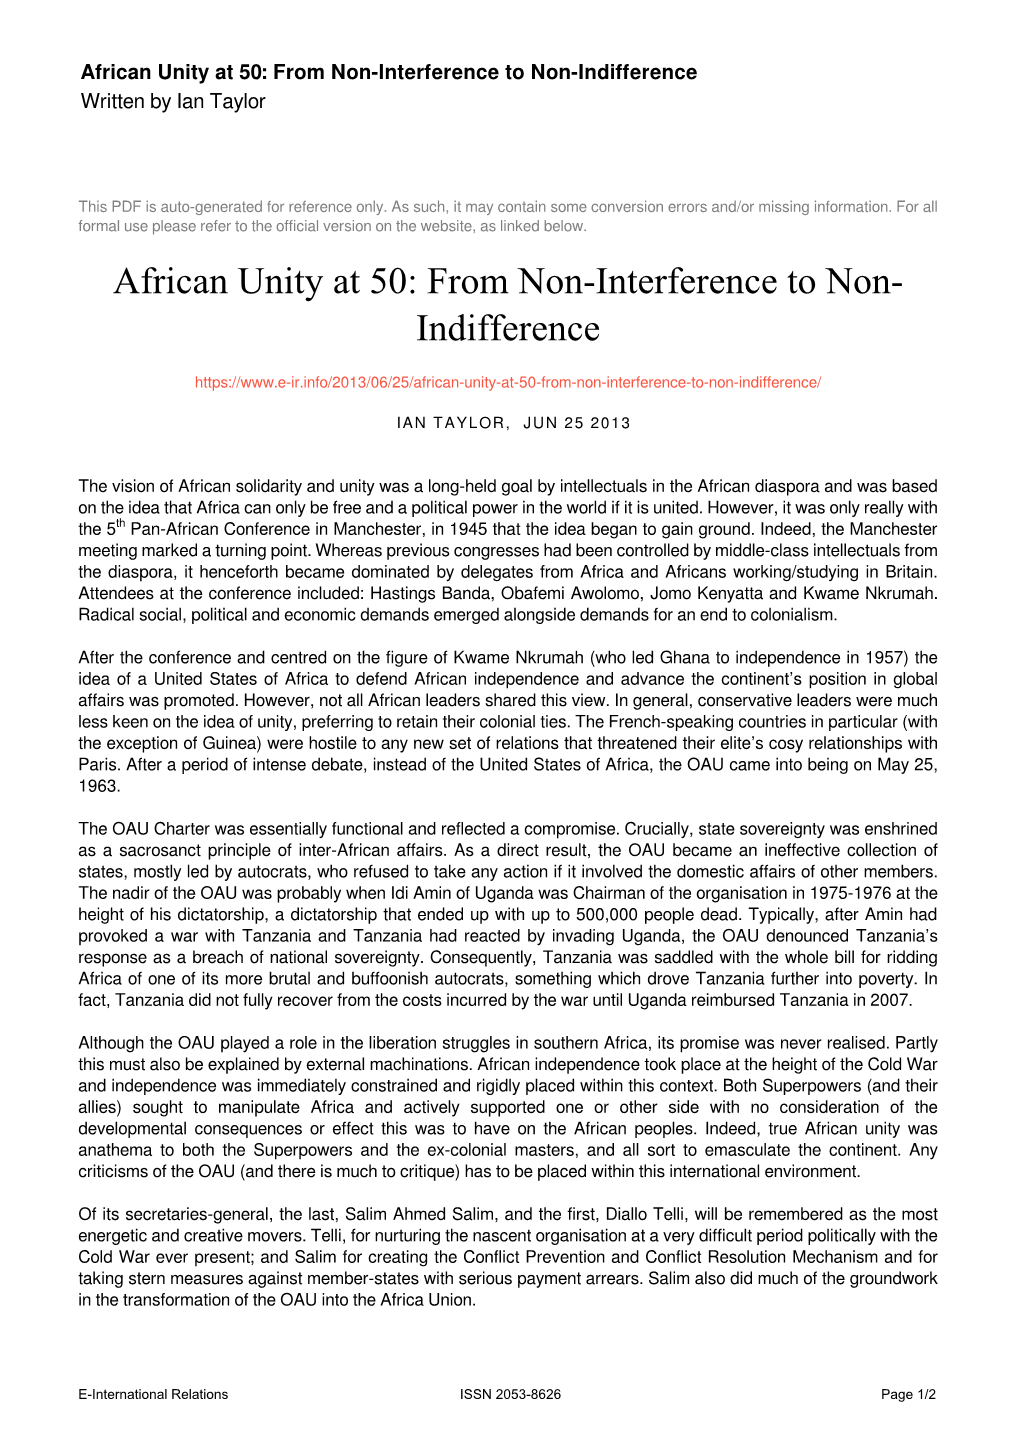 African Unity at 50: from Non-Interference to Non-Indifference Written by Ian Taylor